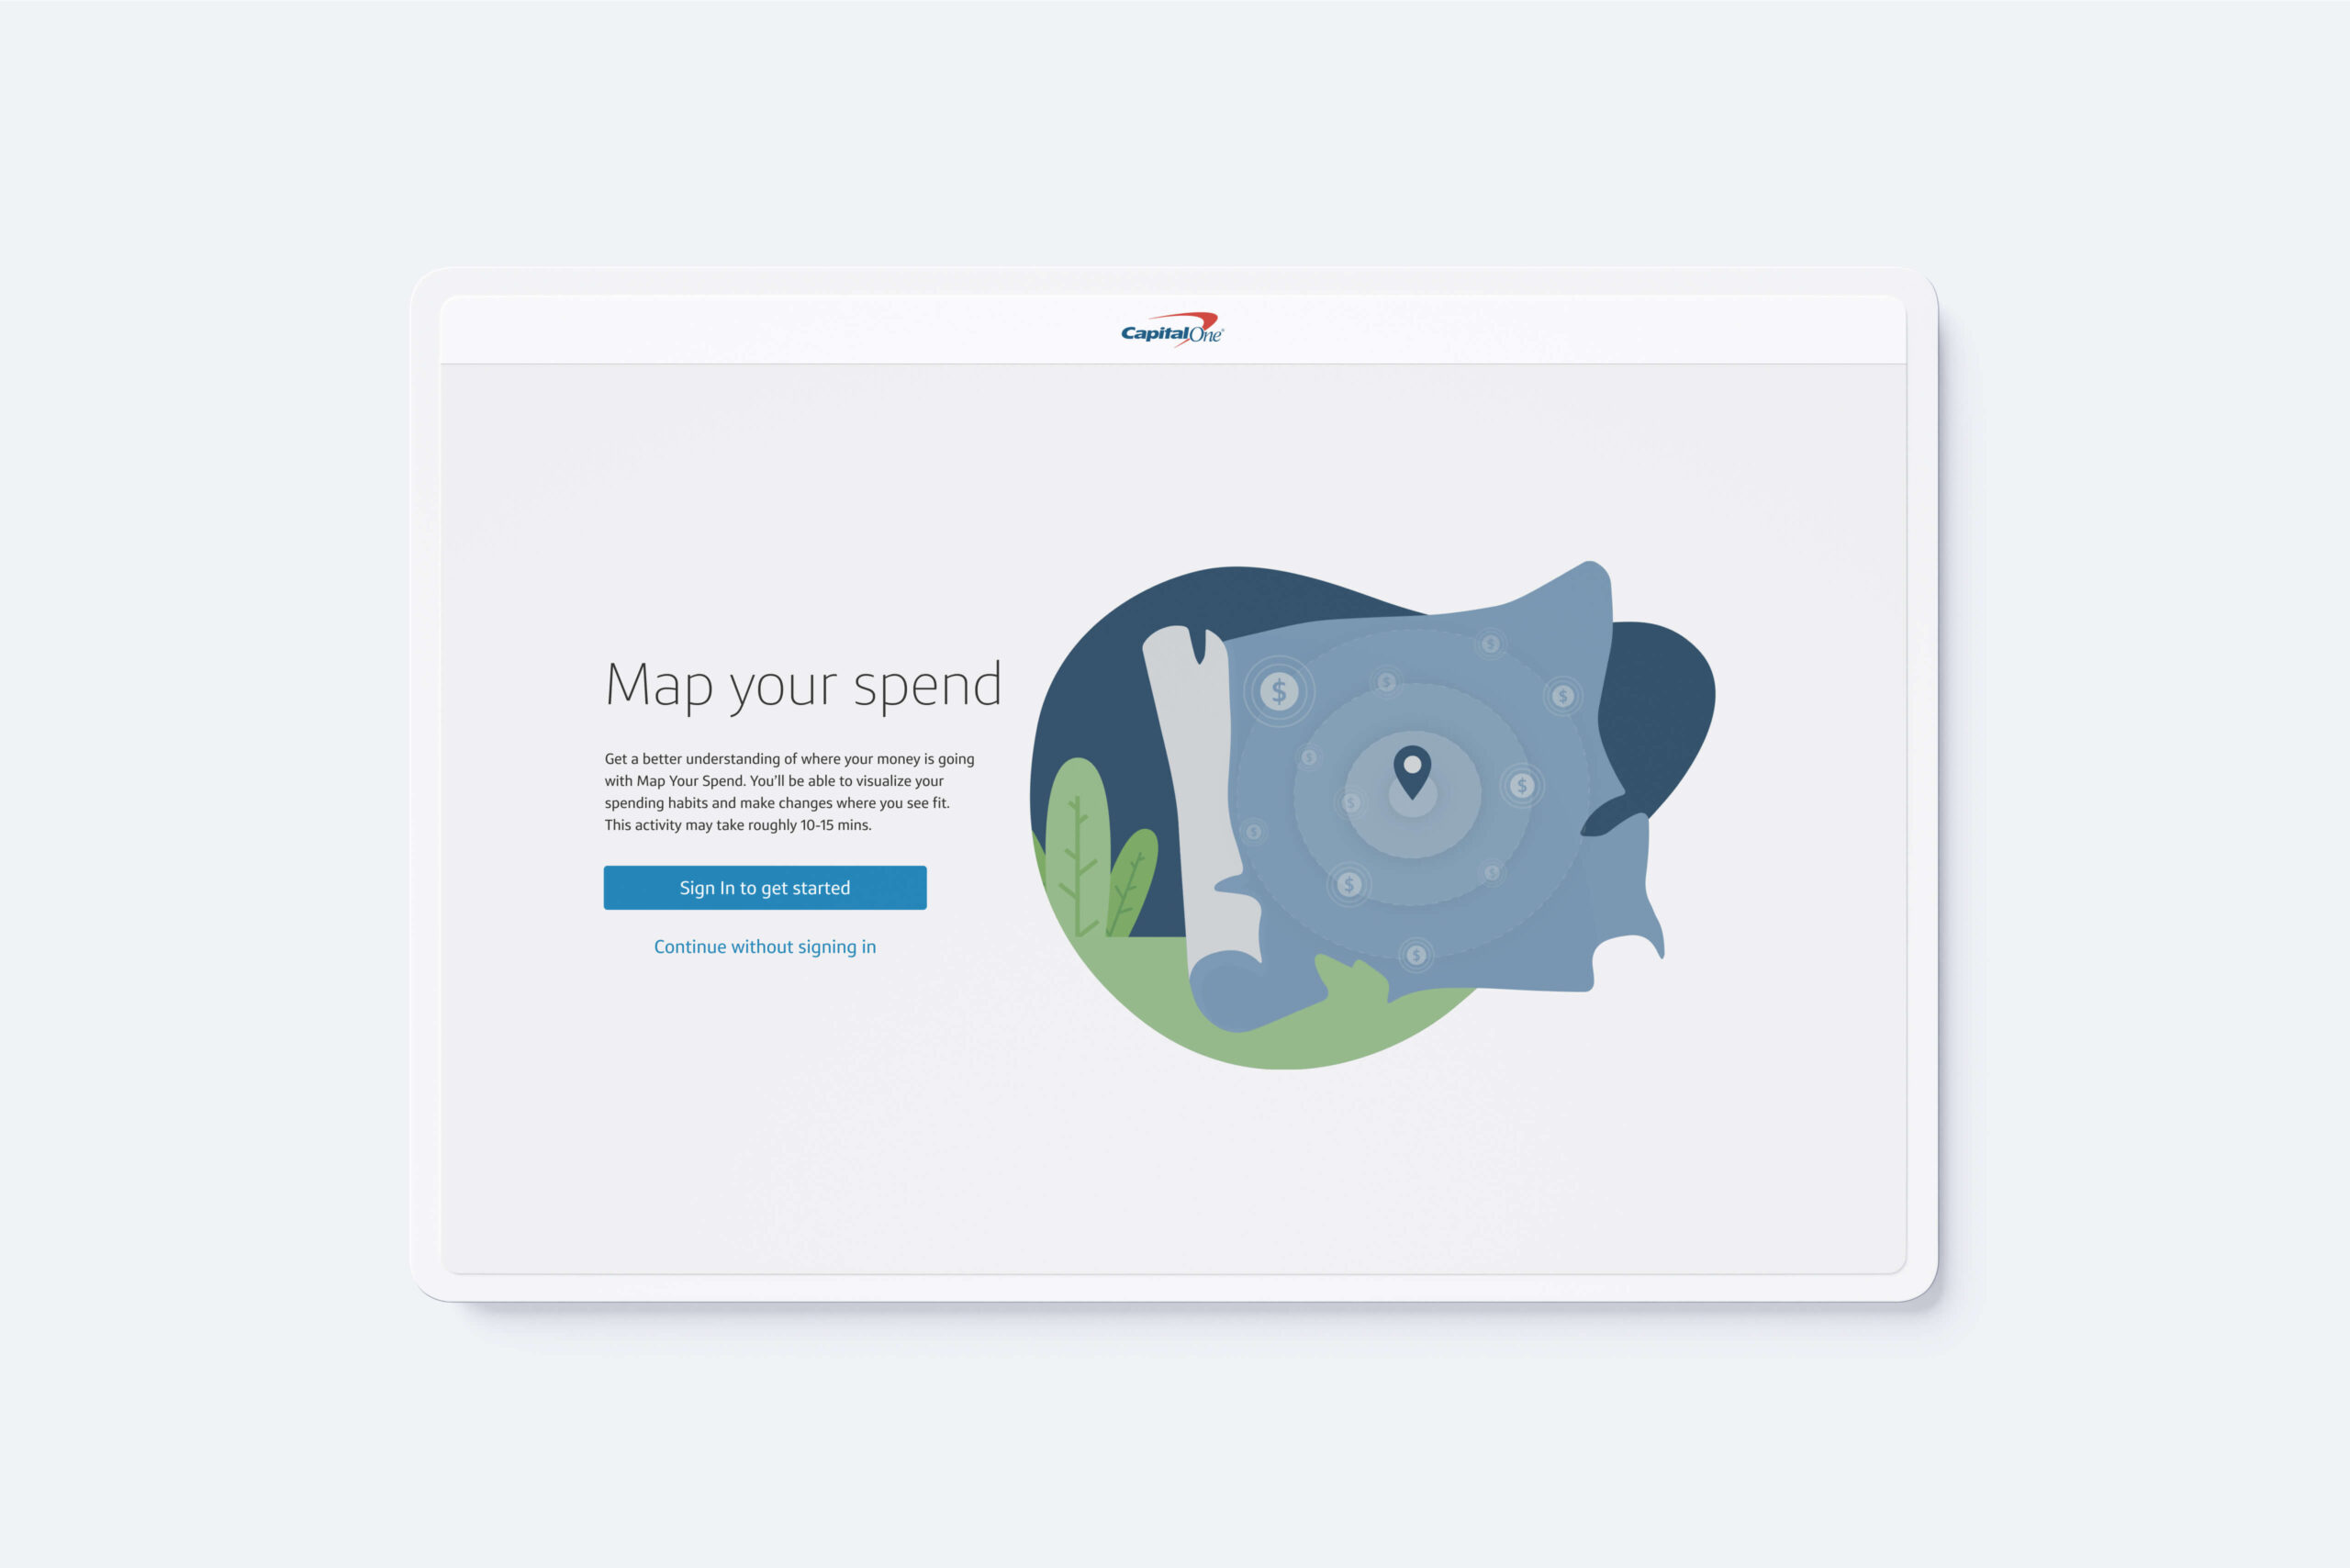 Ipad mockup of Map your spend: A self service financial well being web app.